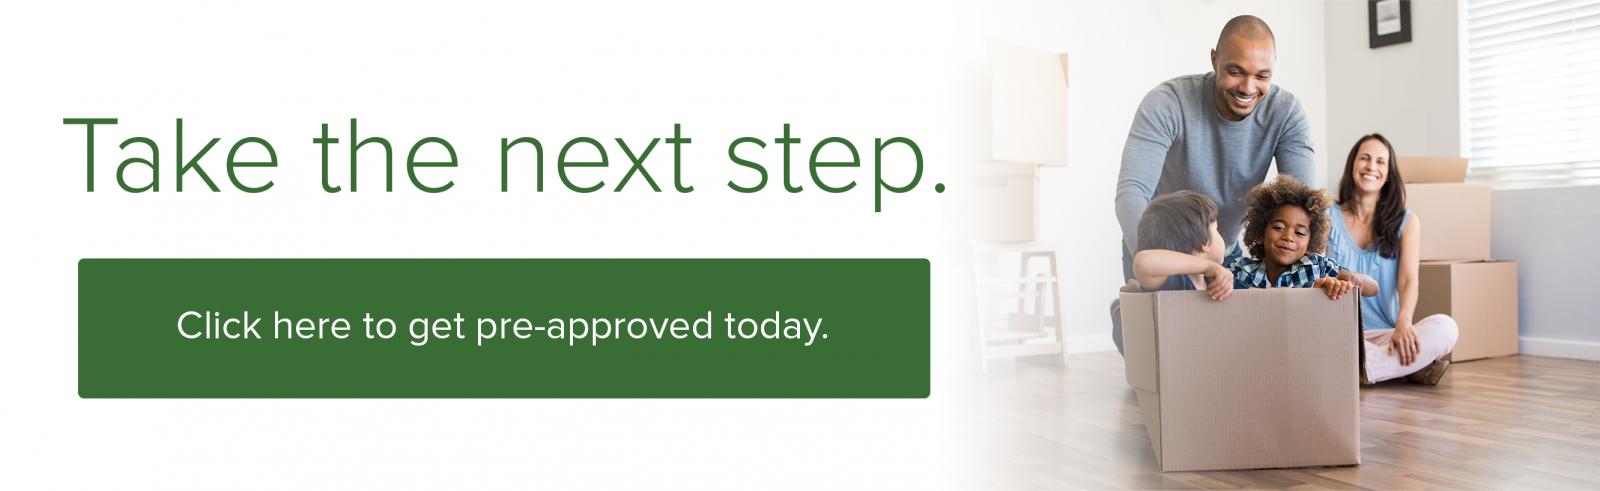 Get a Free Mortgage Pre-Approval Today